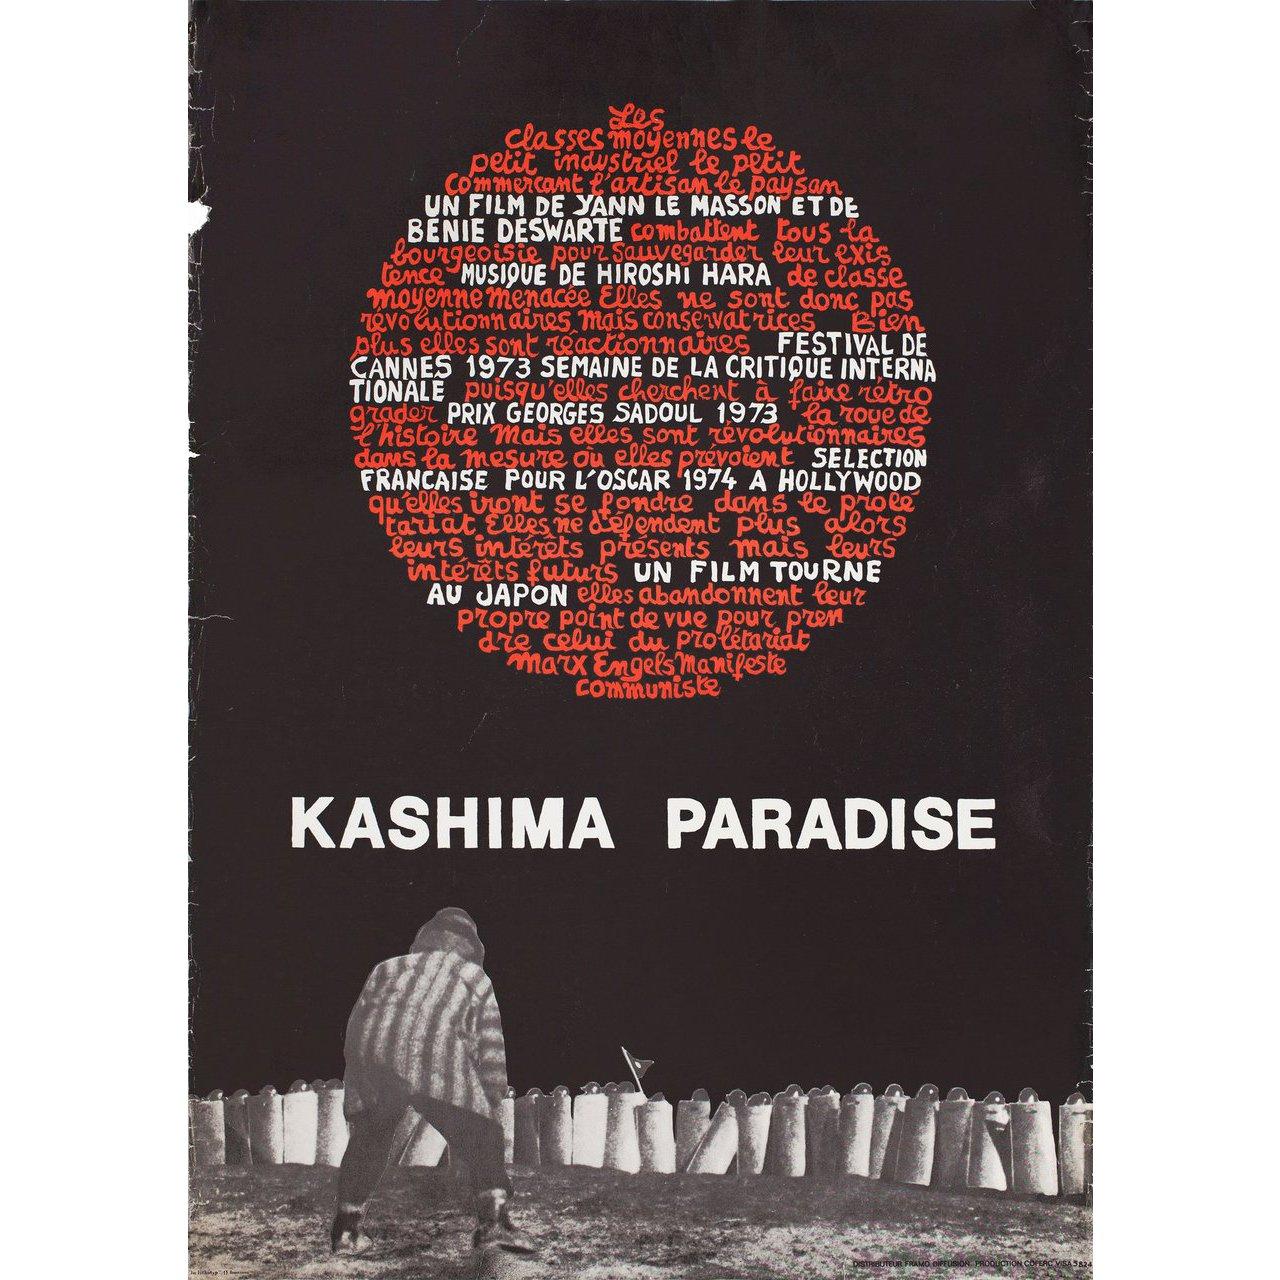 Original 1973 French moyenne poster for the documentary film Kashima Paradise directed by Benie Deswarte / Yann Le Masson with Chris Marker. Fair-Good condition, rolled with edge wear. Please note: the size is stated in inches and the actual size